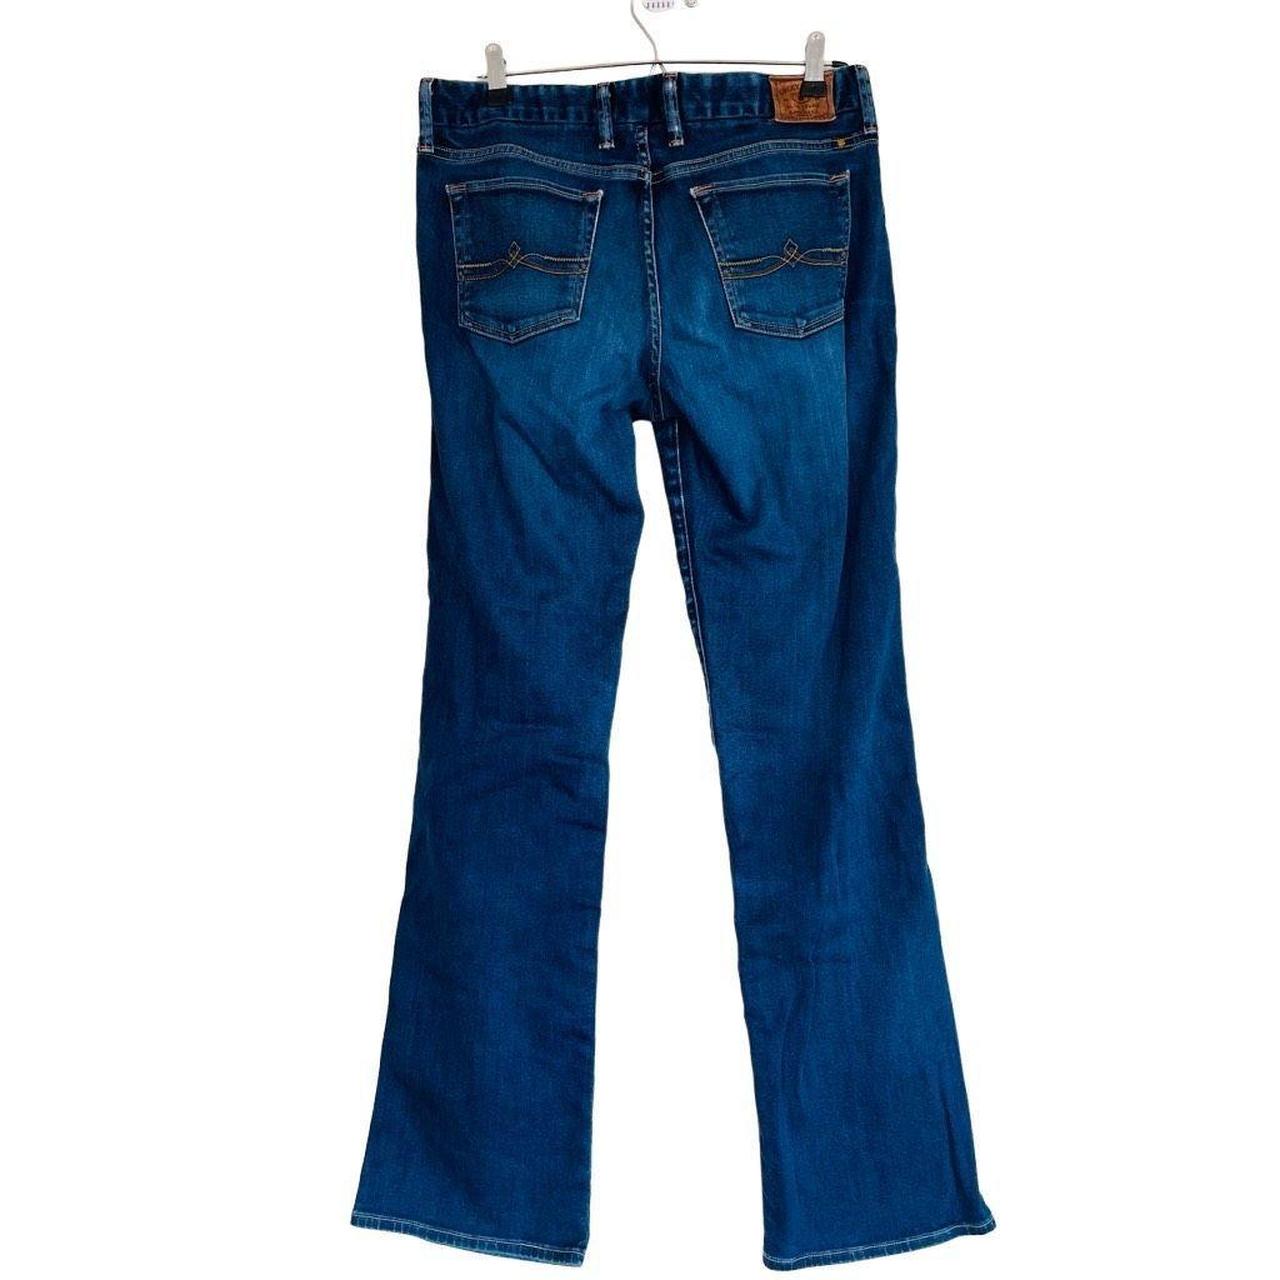 Lucky Brand - The Sweet Jean Boot Cut Jeans, Crafted